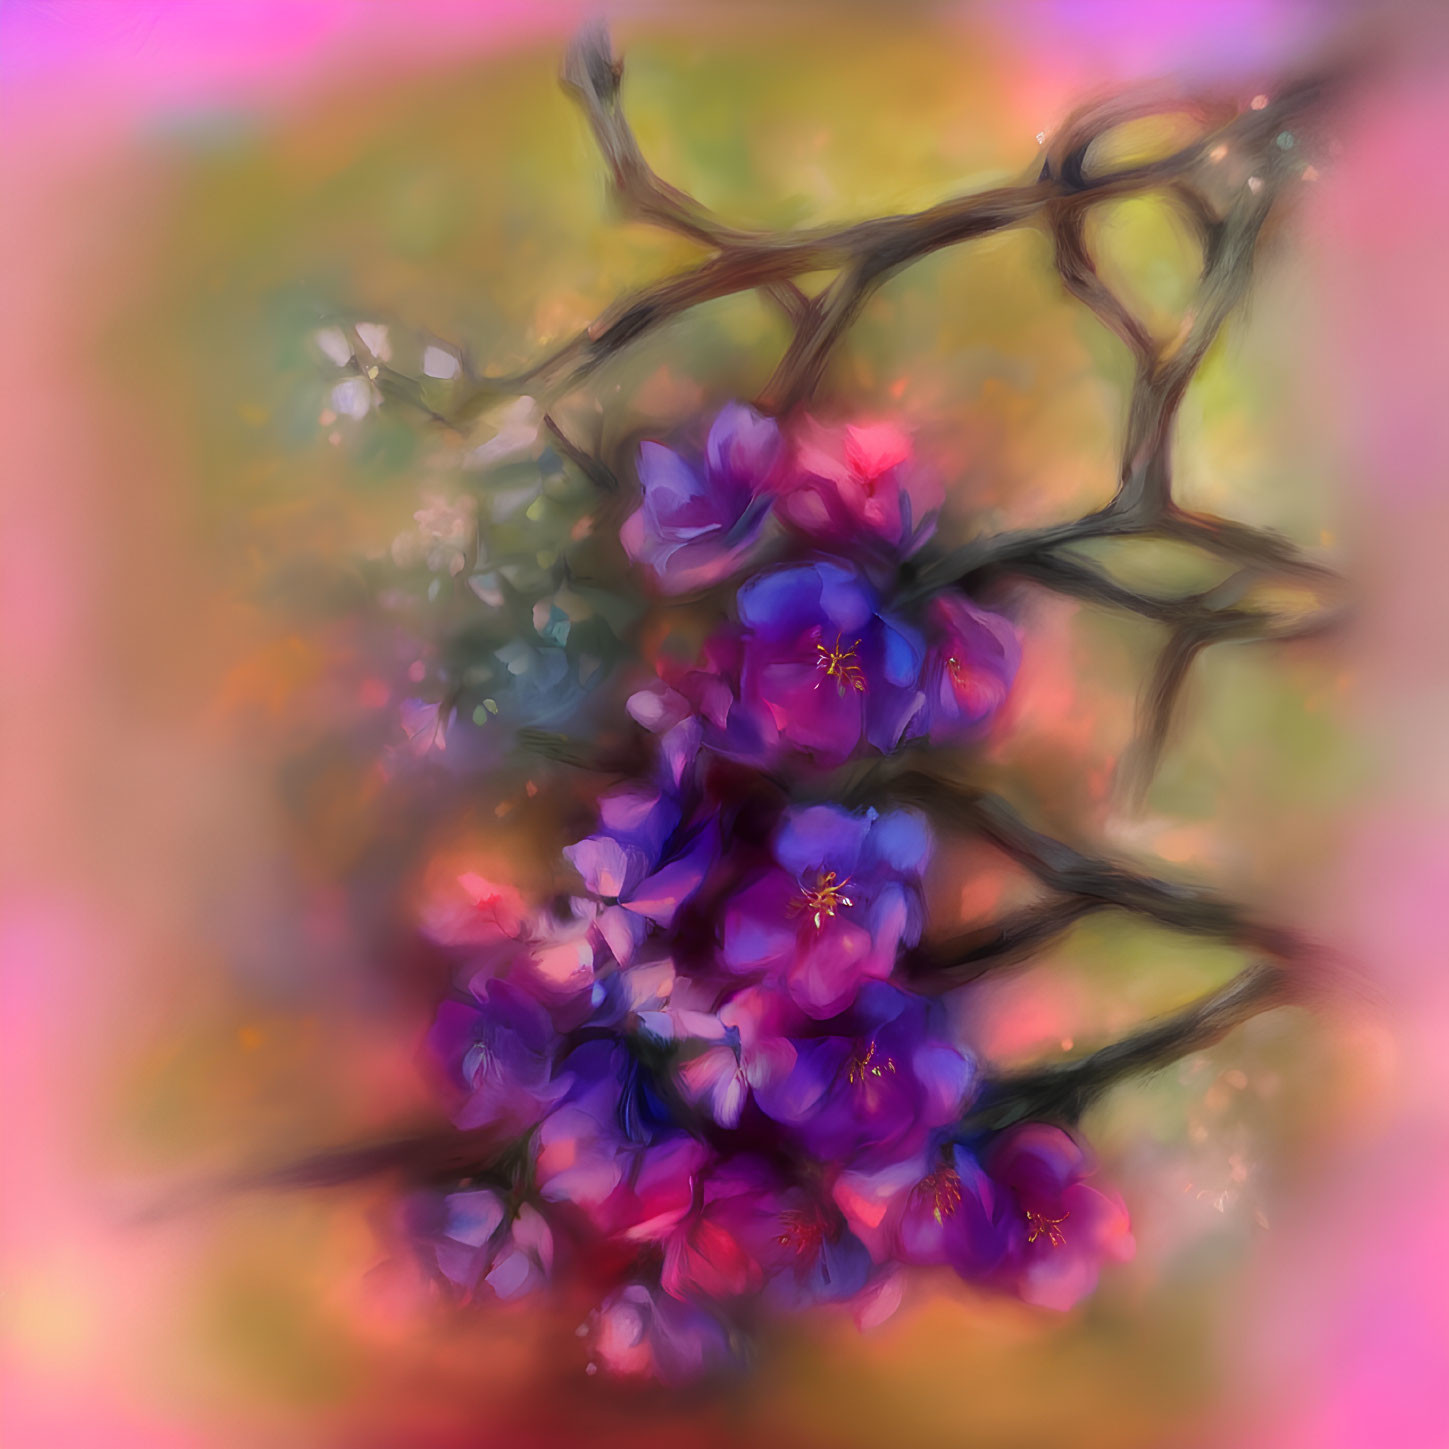 Impressionist-style painting of purple flowers on twisting branches.